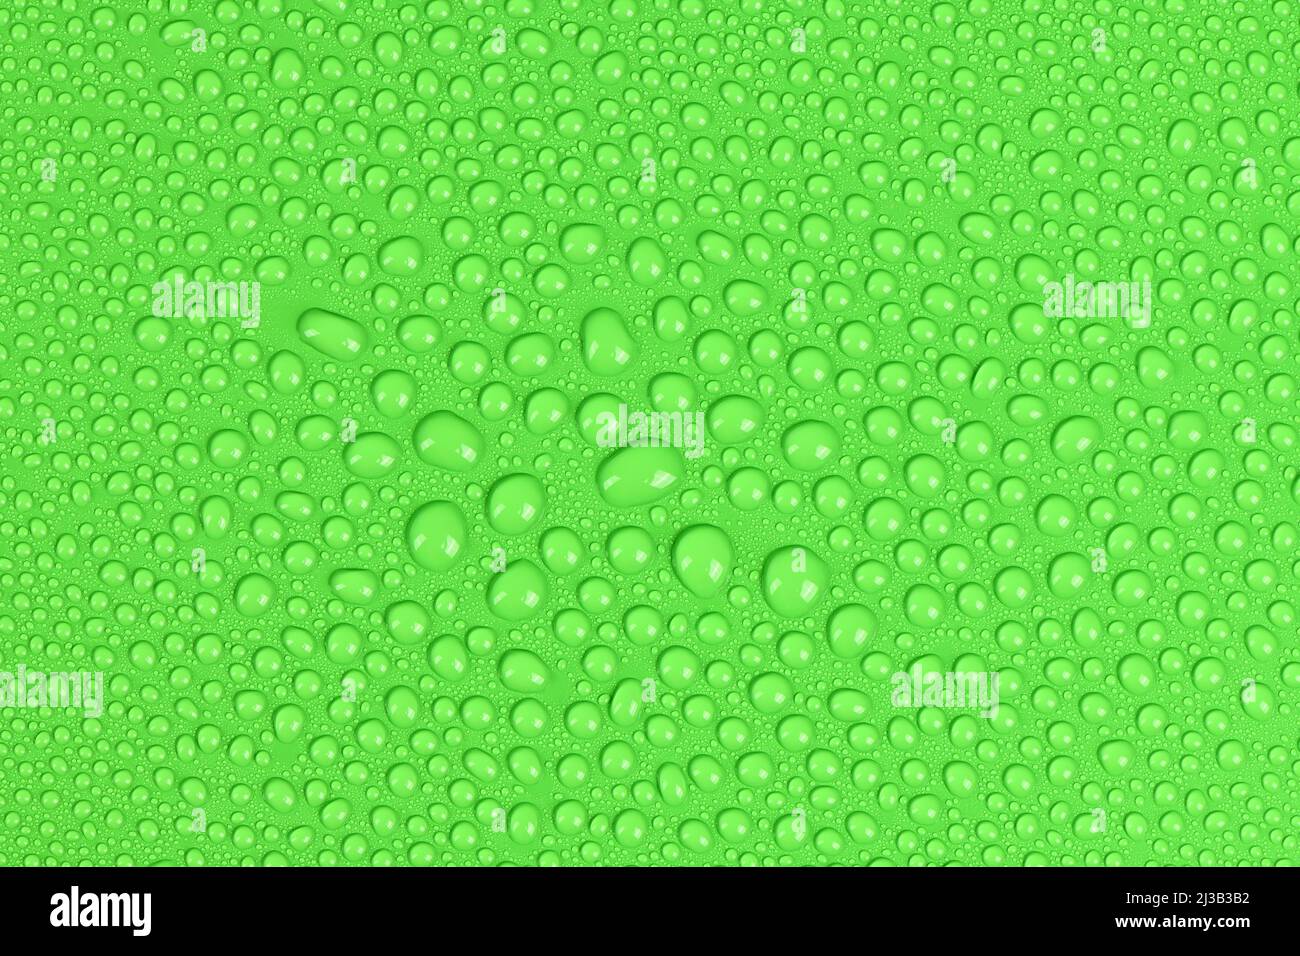 Abstract texture of water drop background. Droplet on green background. High resolution photo. Full depth of field. Stock Photo